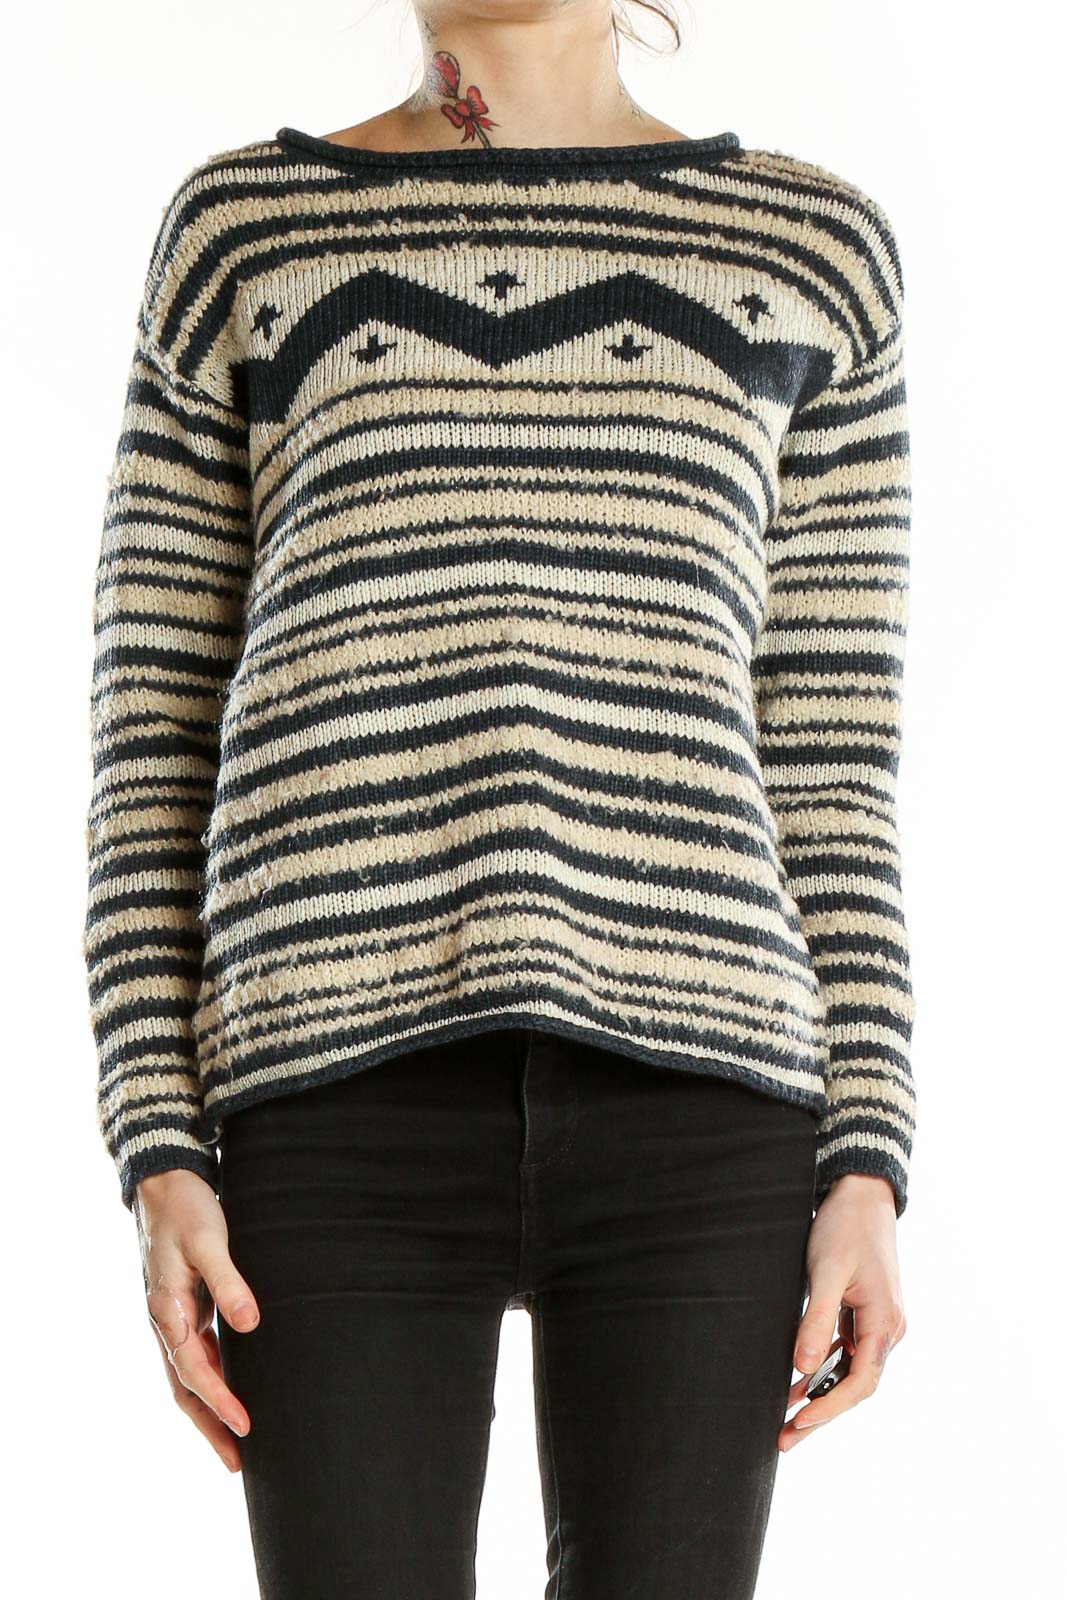 Multicolor Long Sleeve Striped Vintage Sweater Front